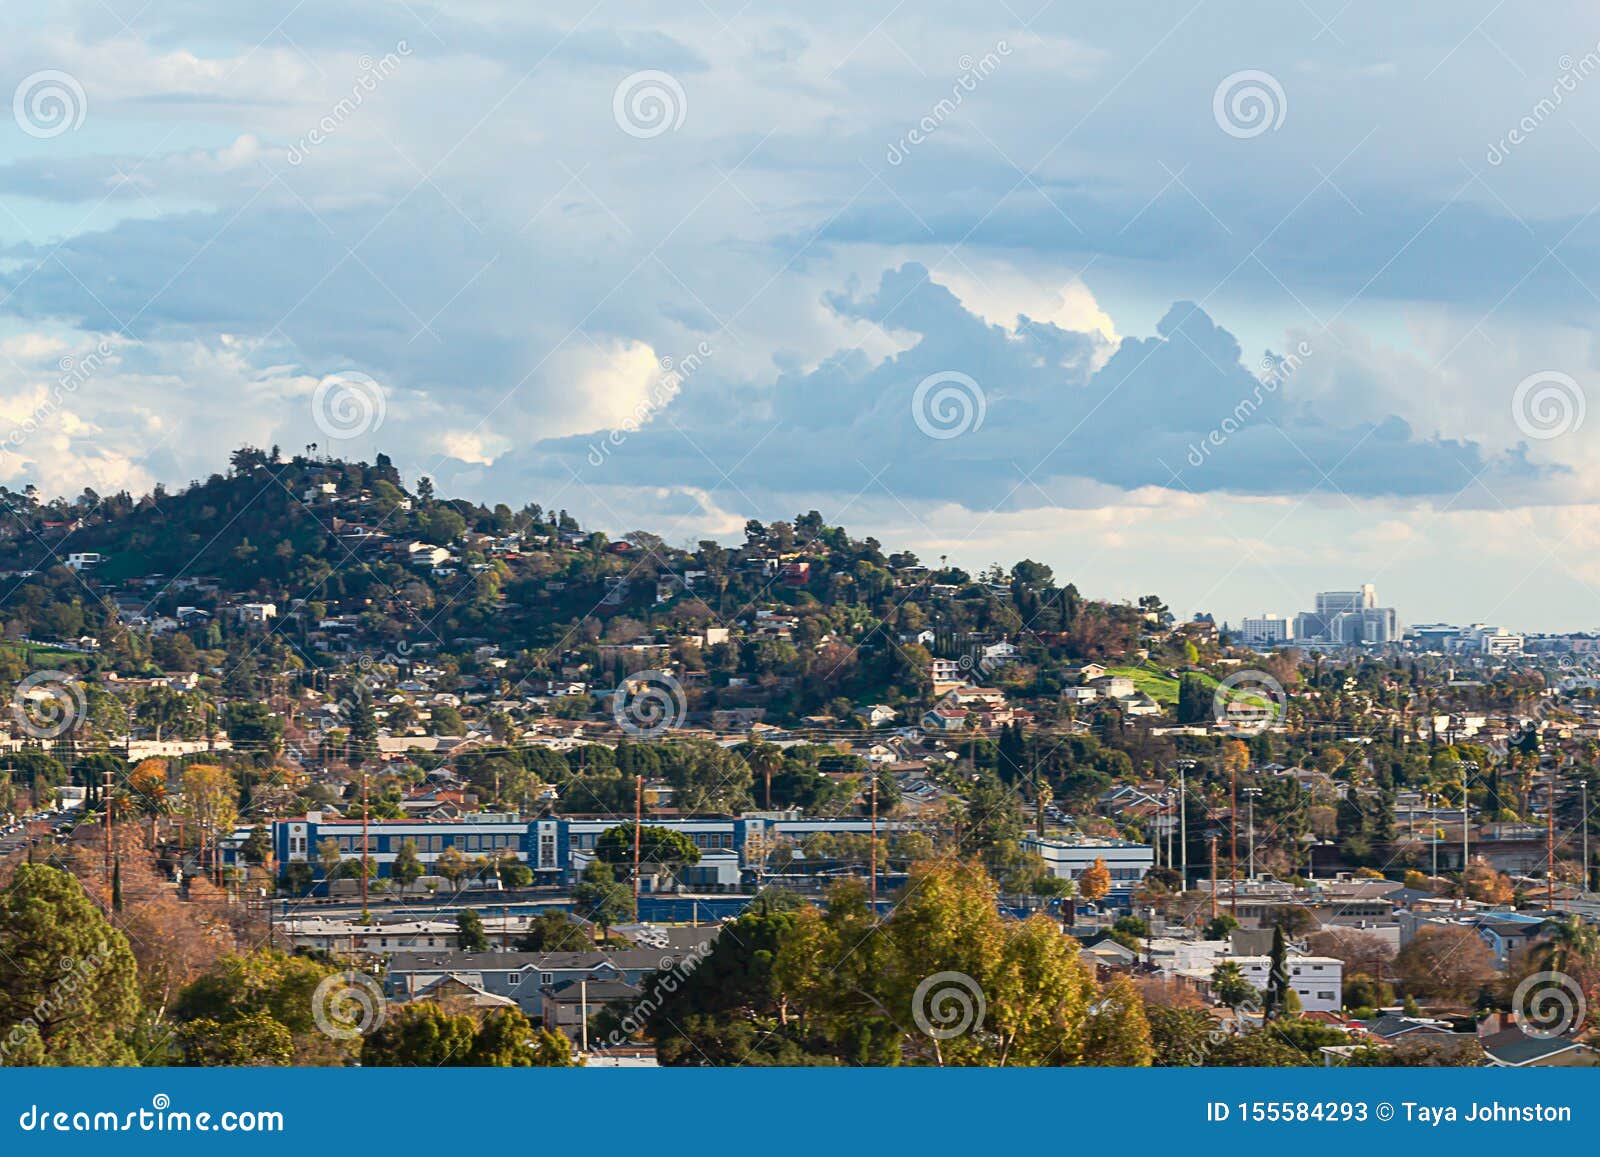 City Scape with Evergreen and Disiduous Trees with Hills and Cloudy ...